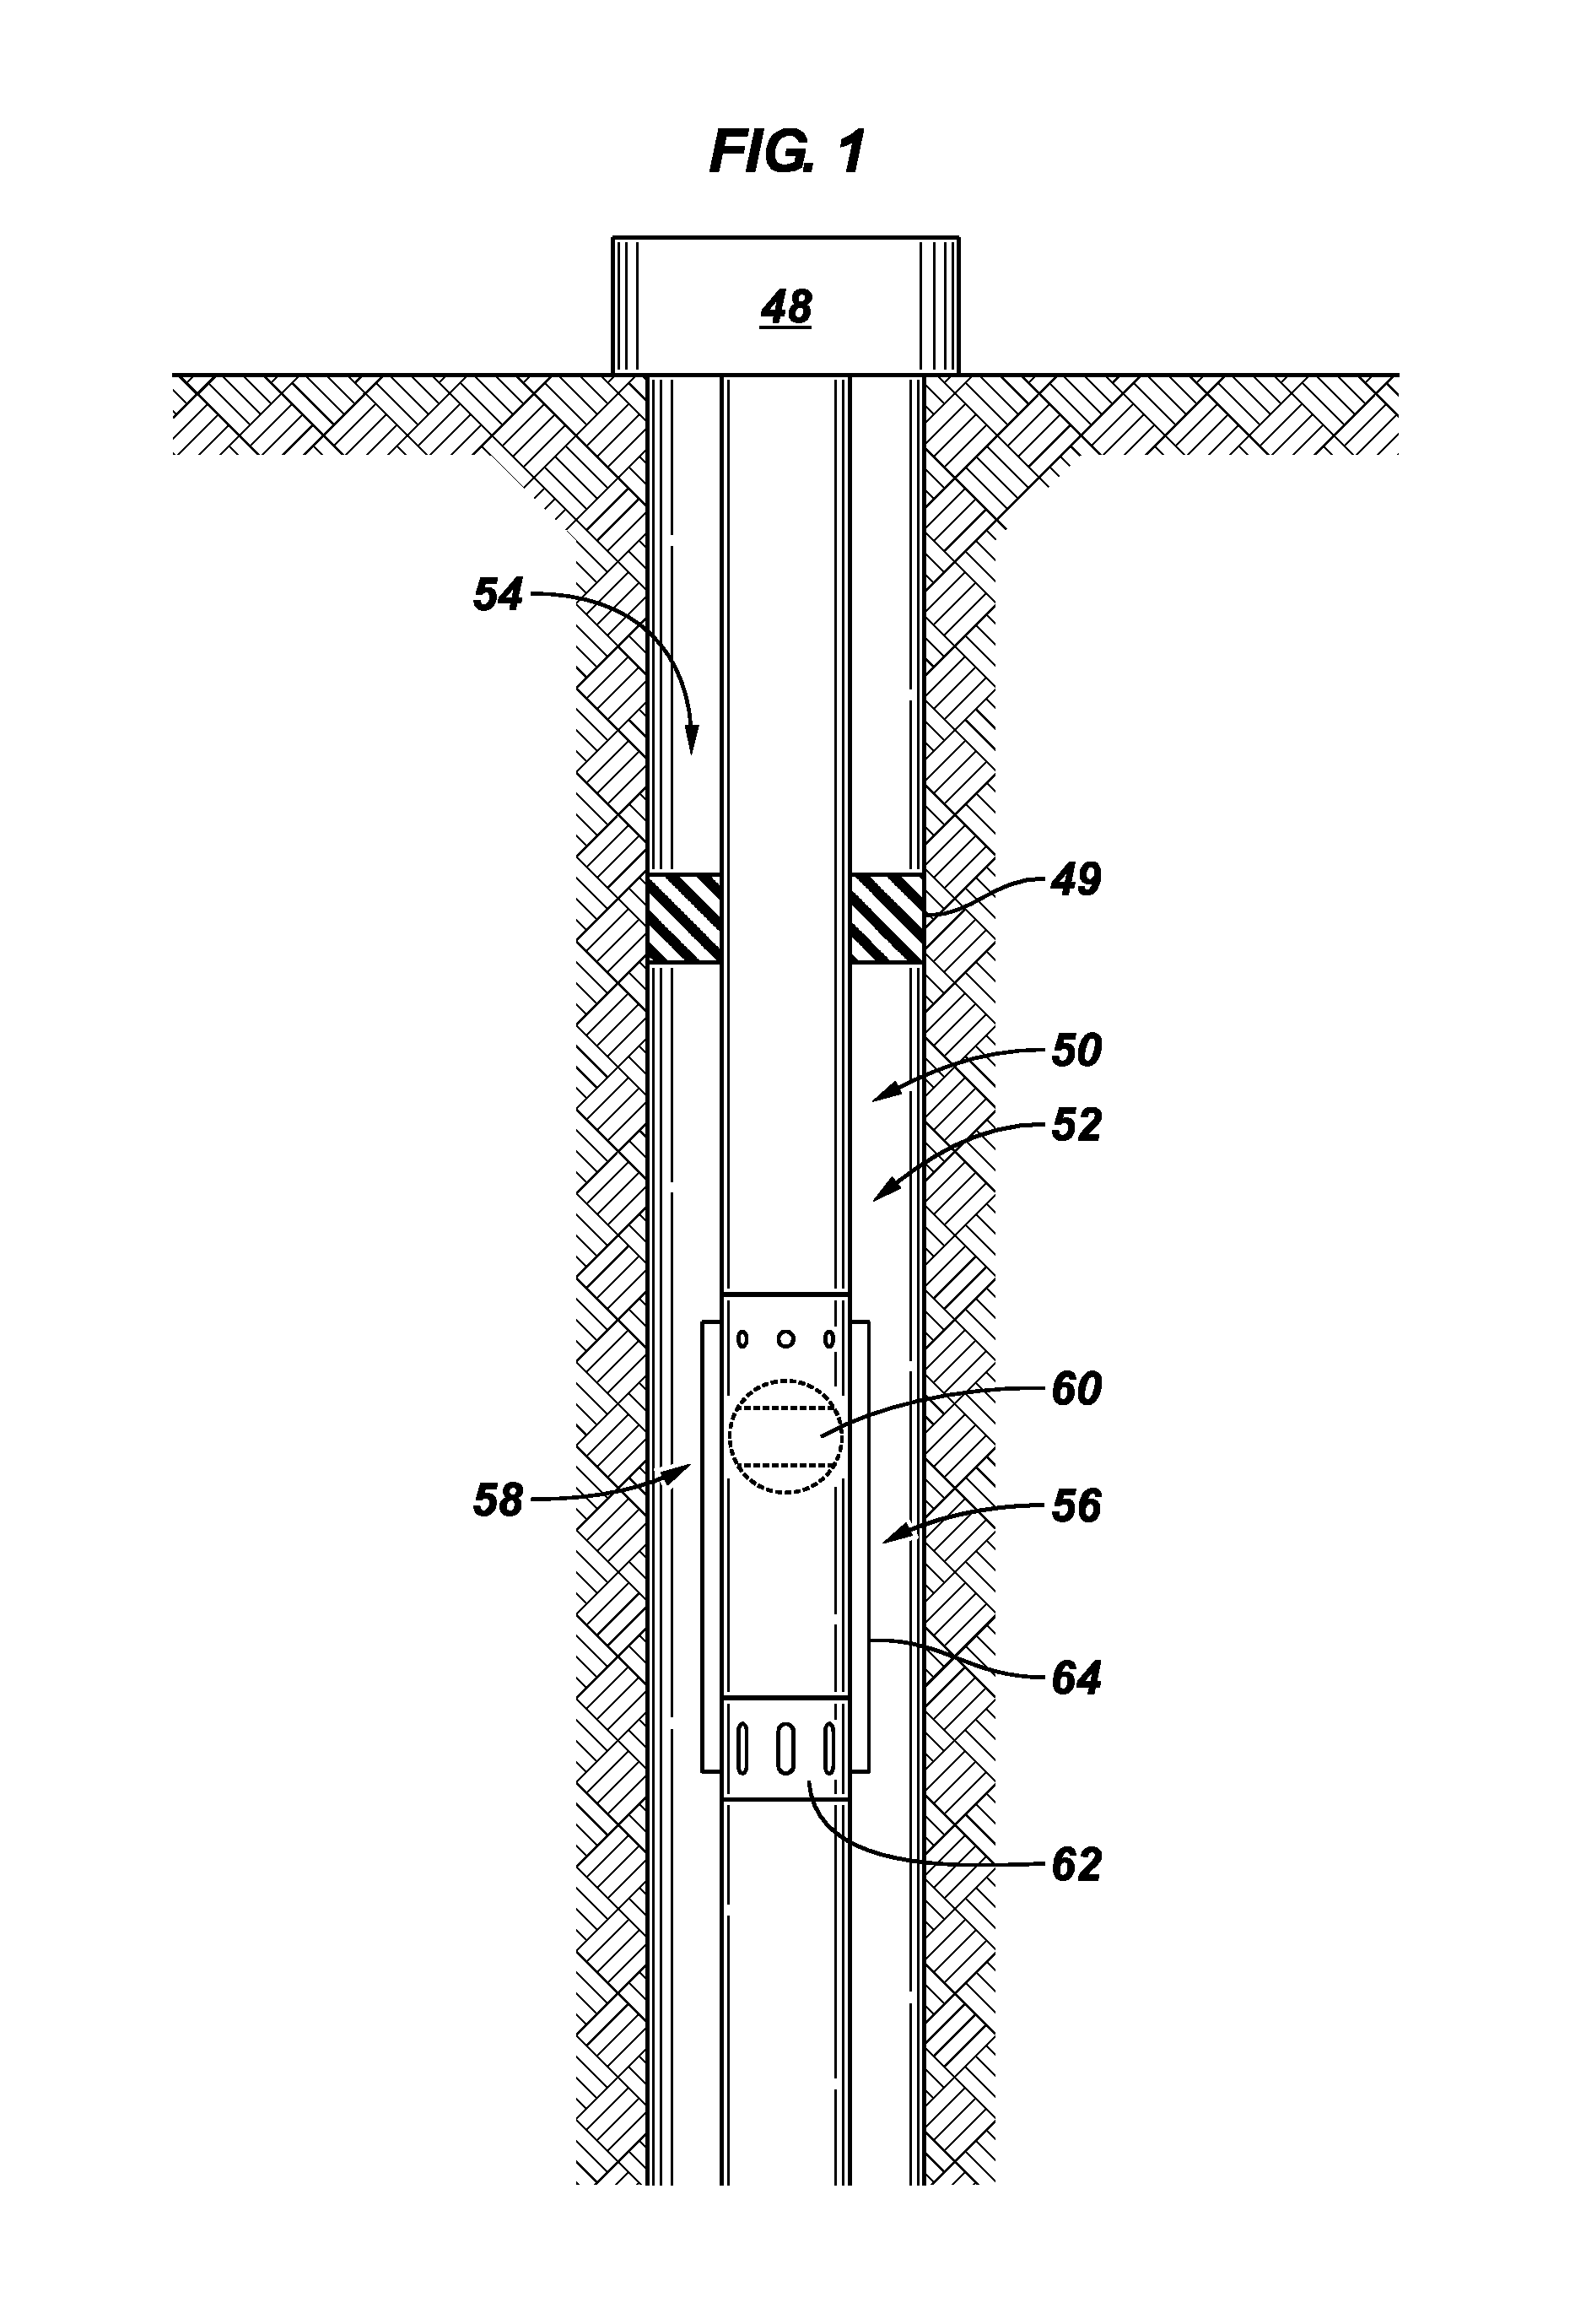 Flow control system with variable staged adjustable triggering device